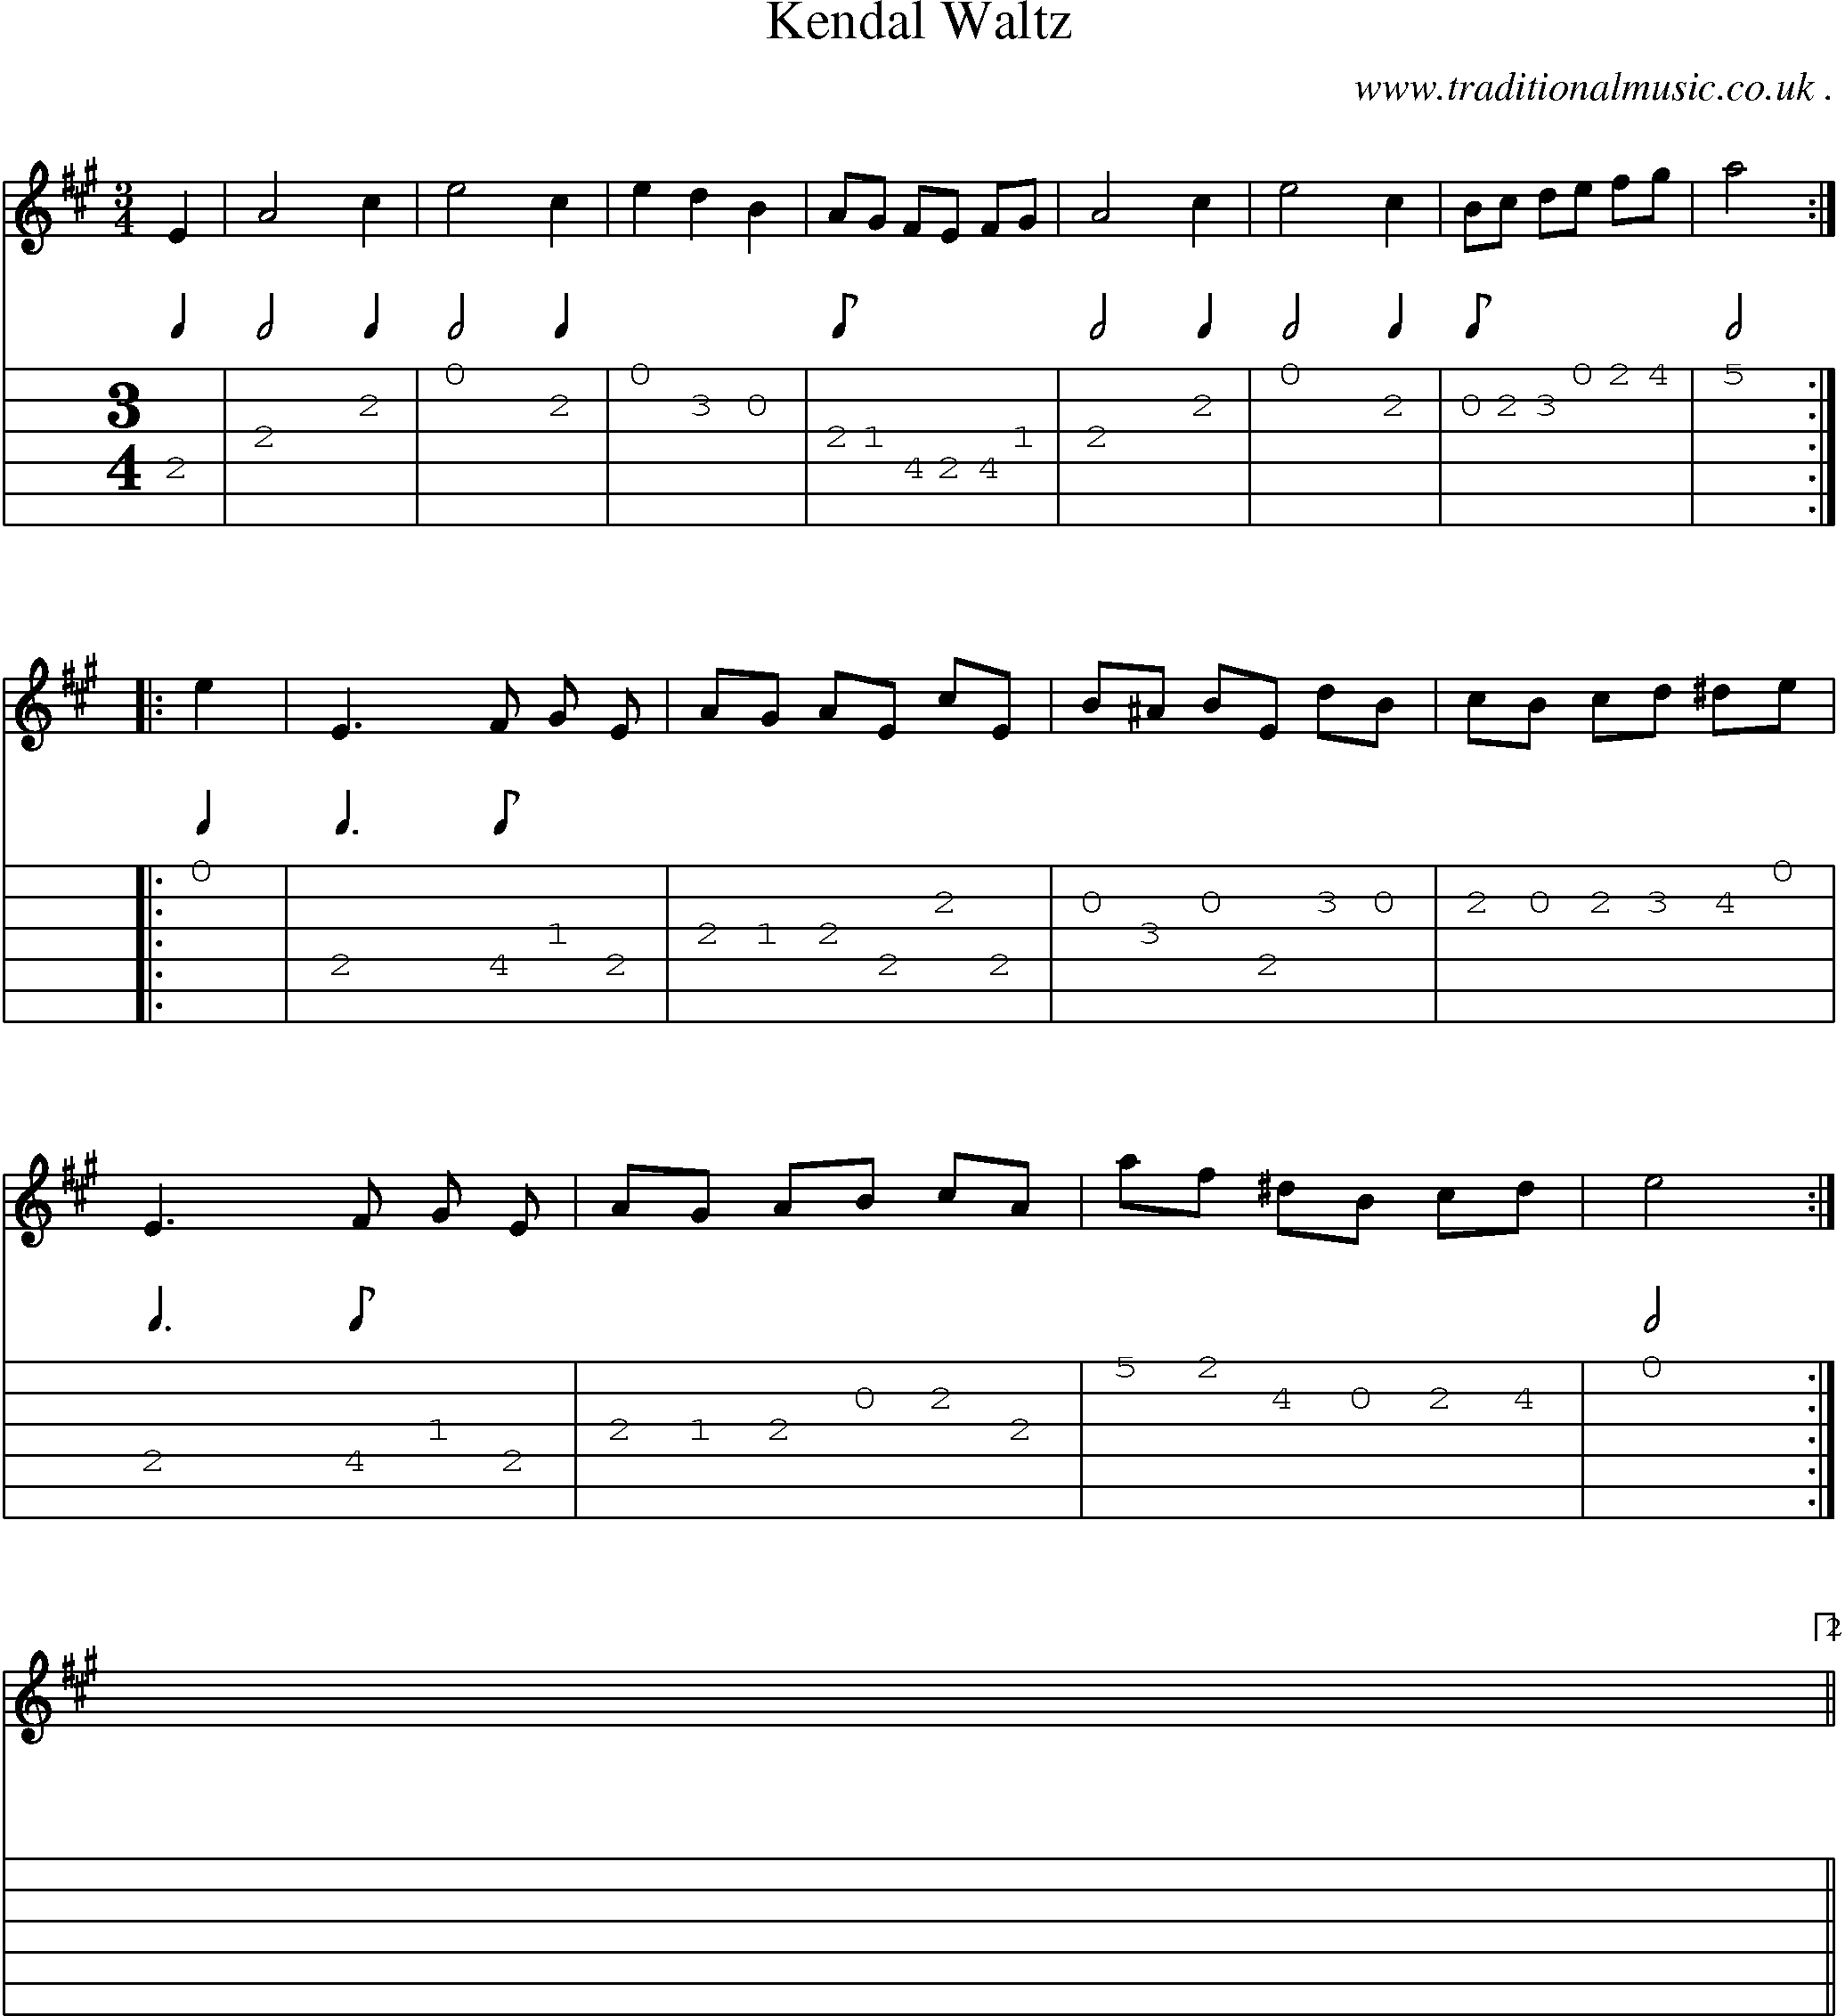 Sheet-Music and Guitar Tabs for Kendal Waltz